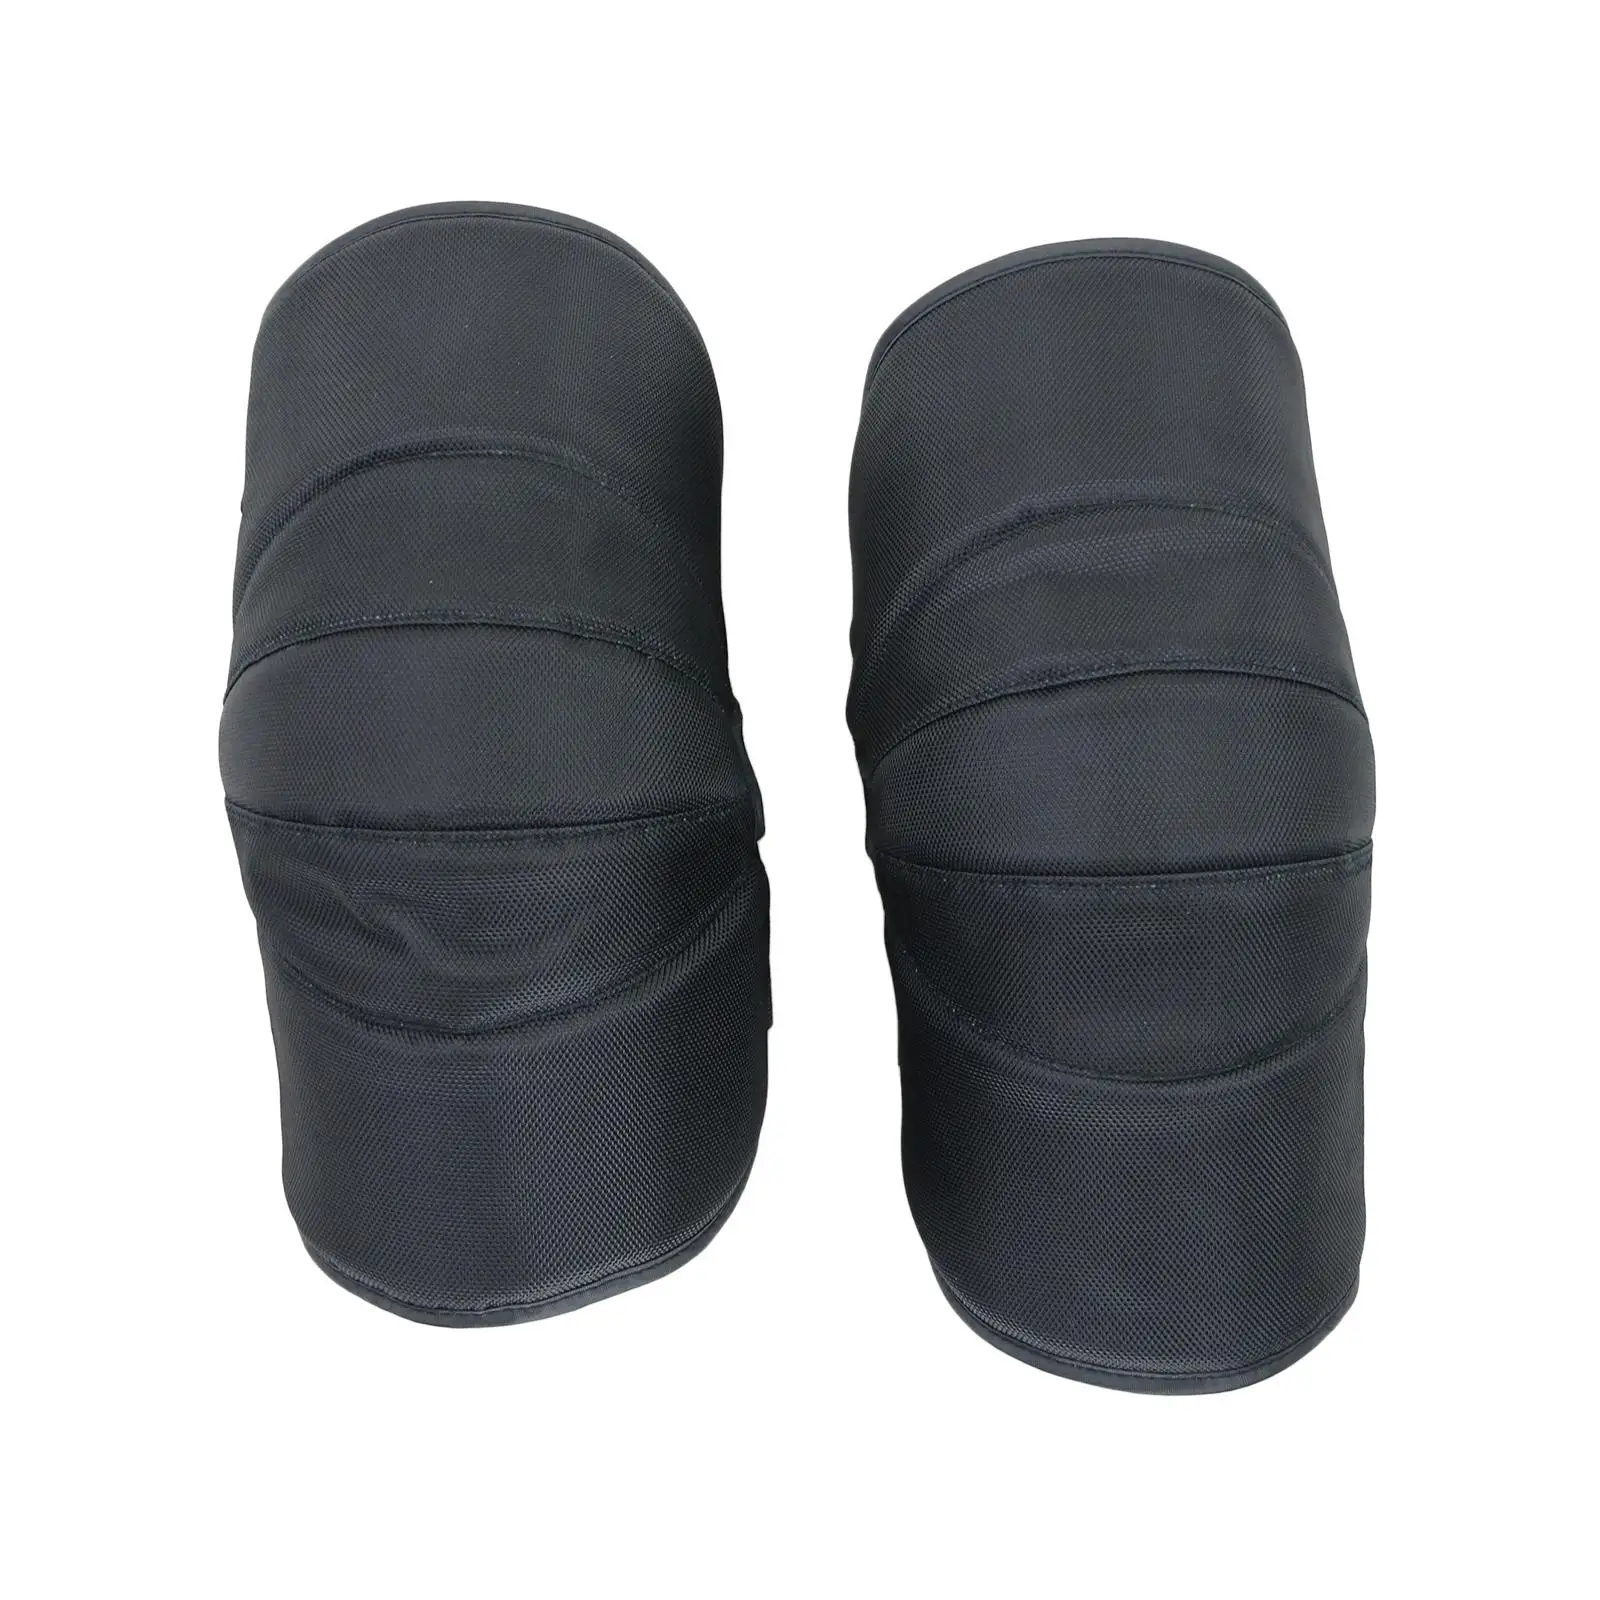 Motorcycle Knee Pads Winter Windproof Elastic Knee Warmers Protective Guards for Riding Skiing Motorcycle Bike Cold Weather